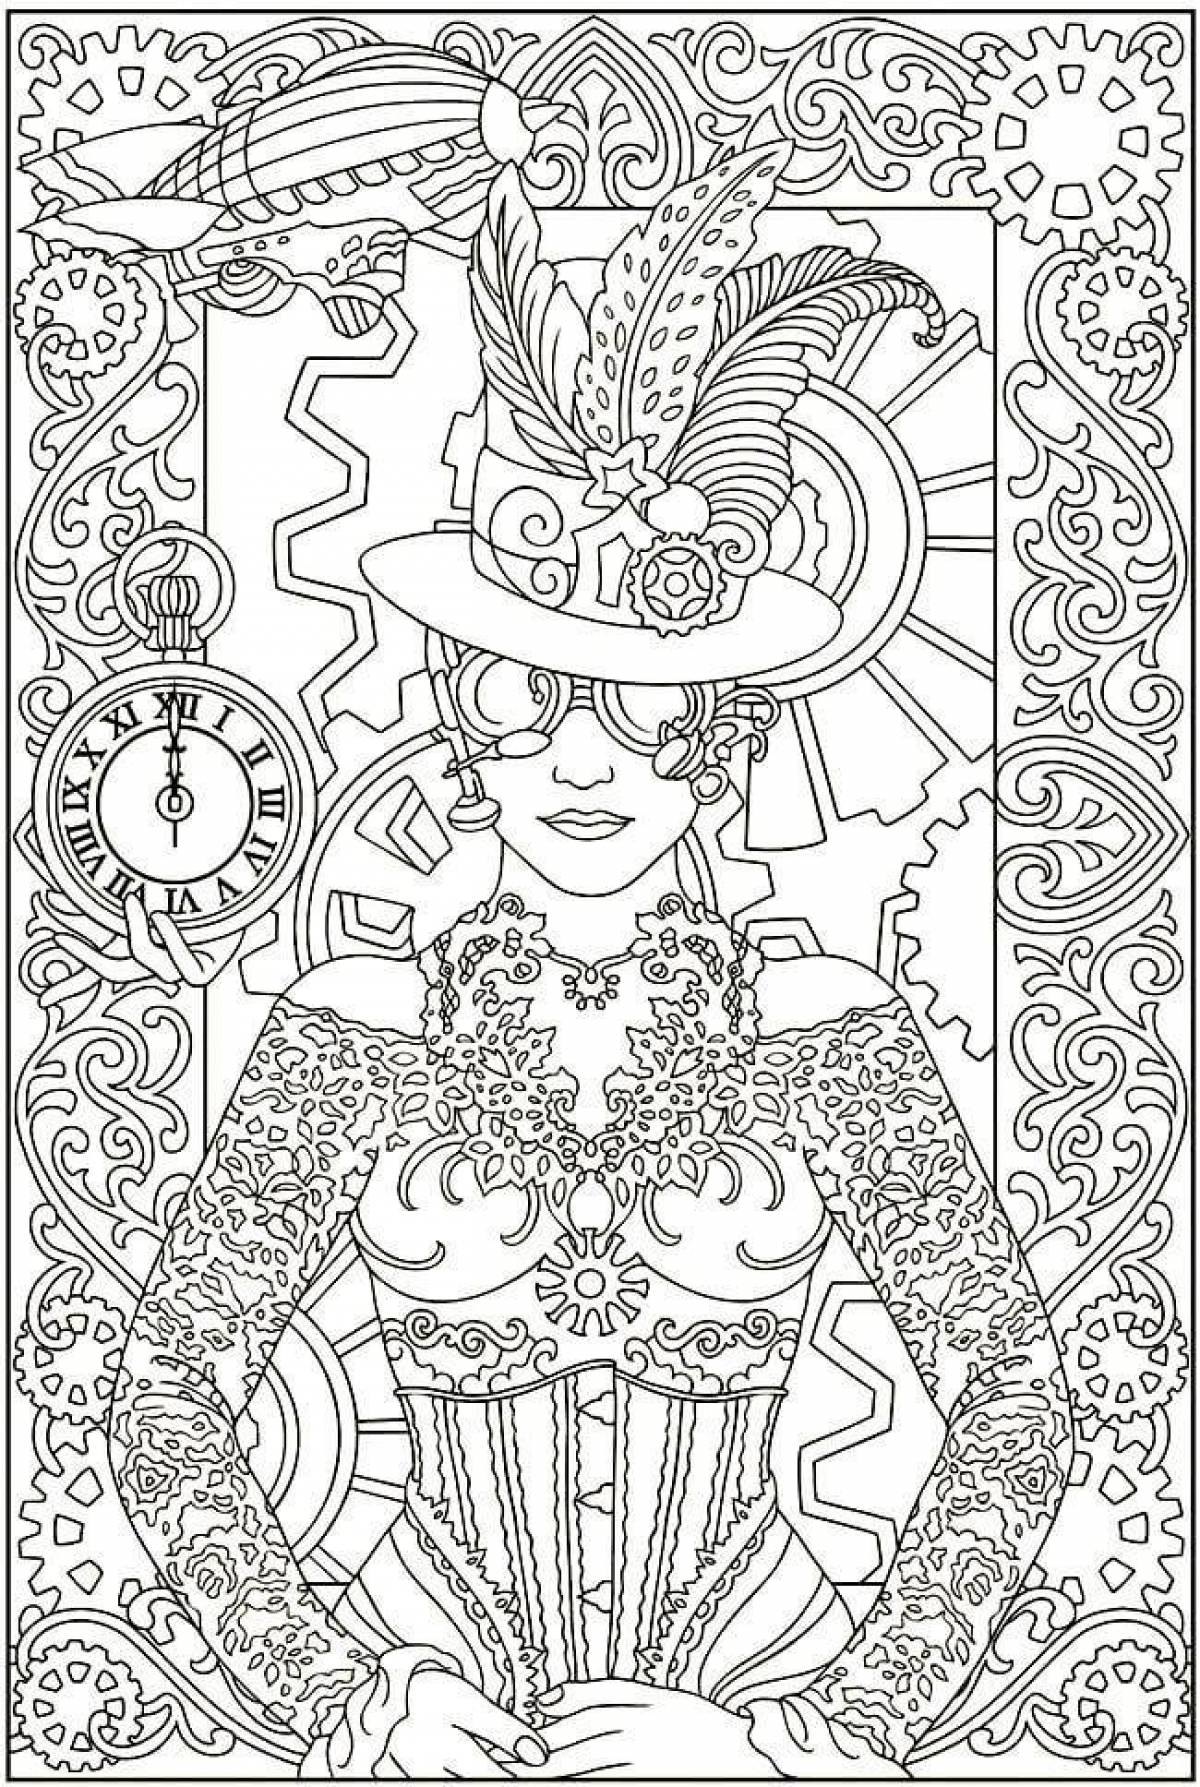 Great adult coloring book